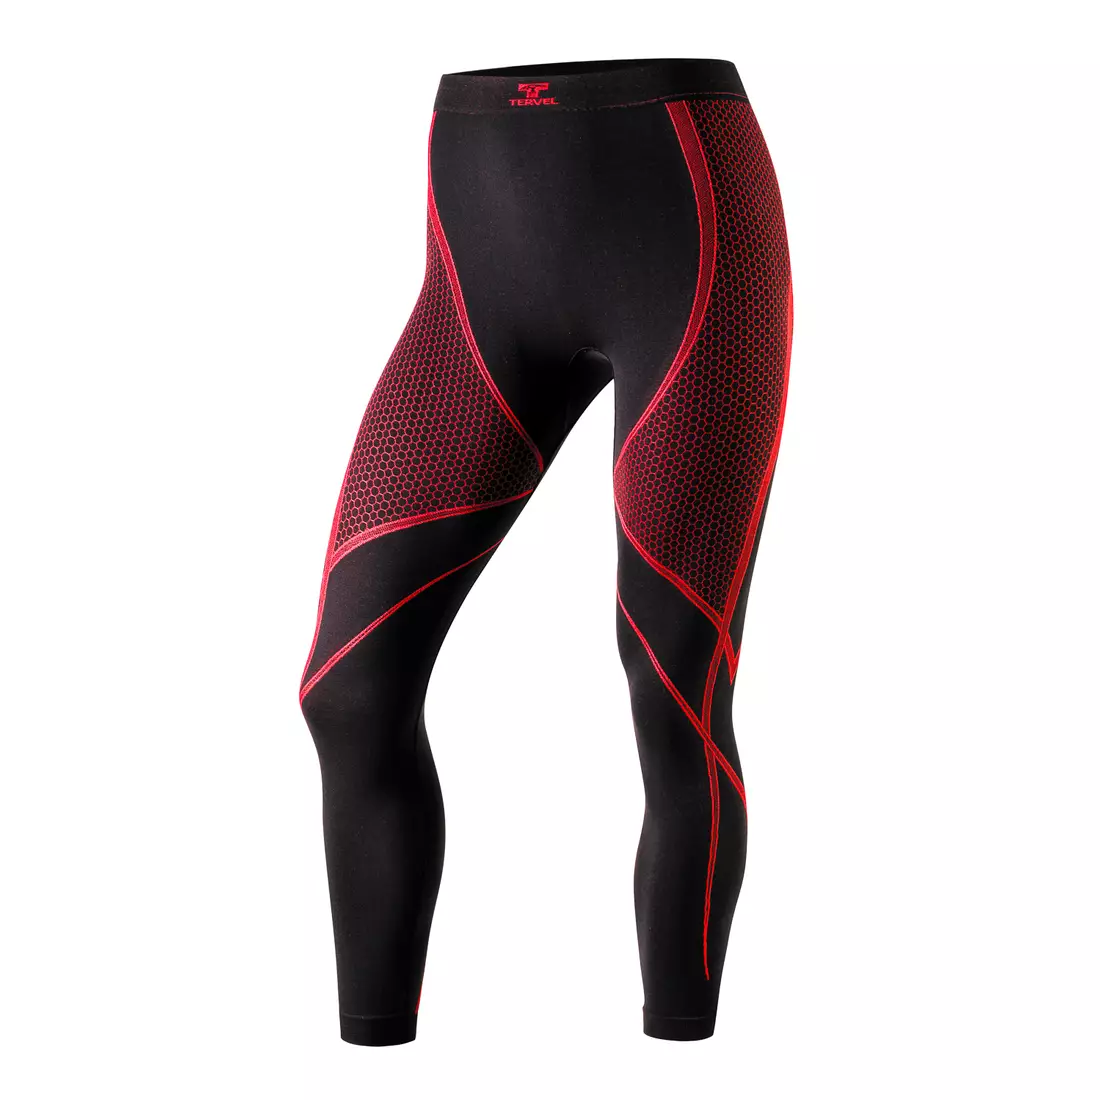 TERVEL OPTILINE OPT 4007 - women's thermoactive leggings color: black and red